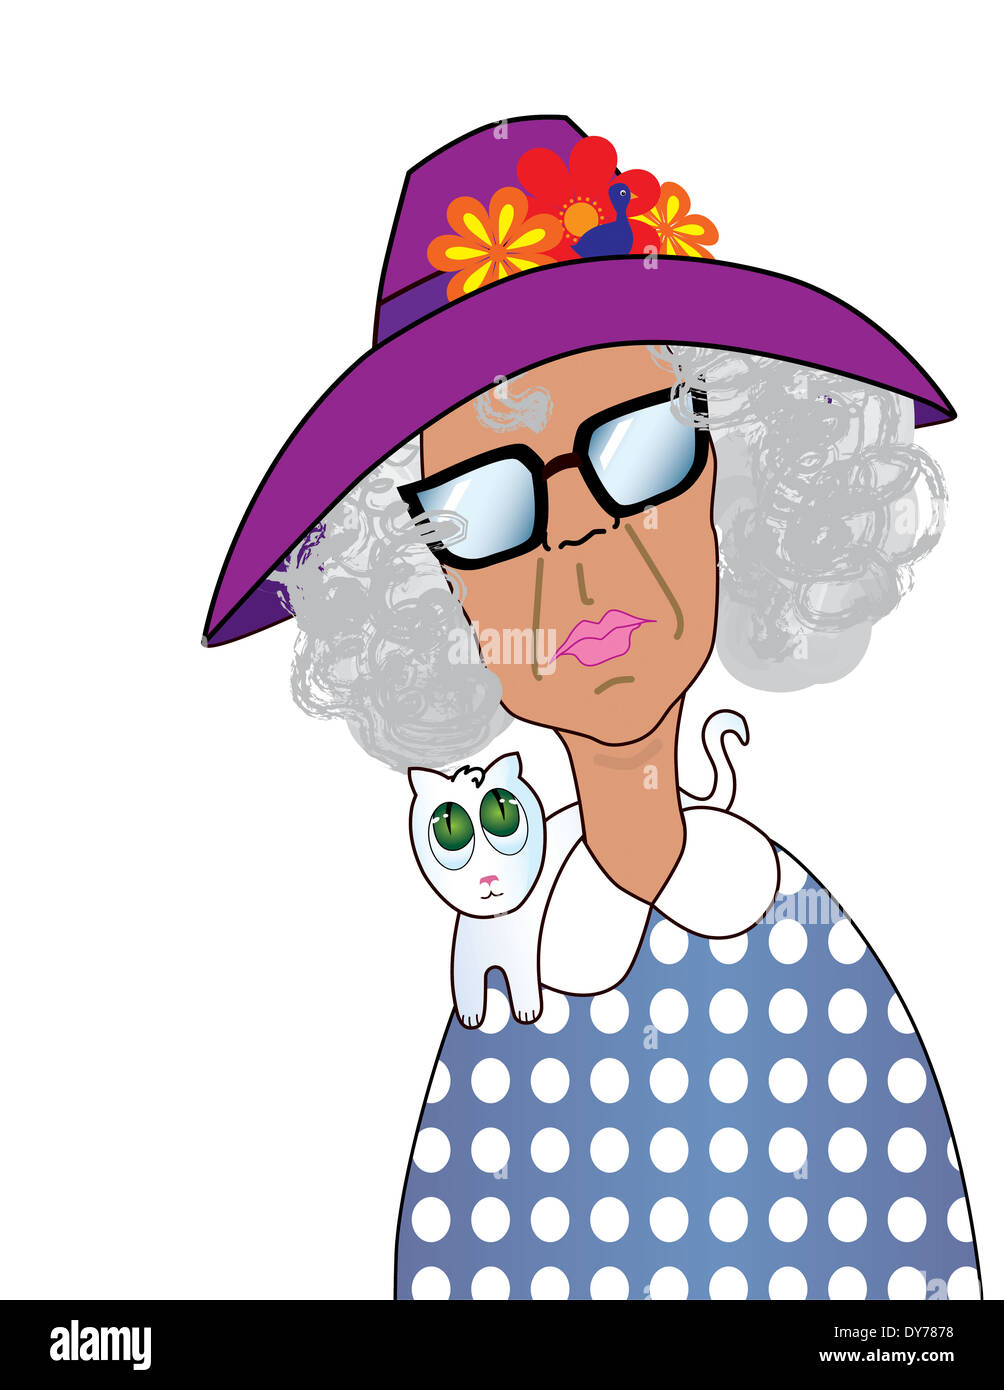 Fun Cartoon Image of a Grumpy Old Lady in a Big Purple Hat with a Cat on her Shoulders Stock Photo